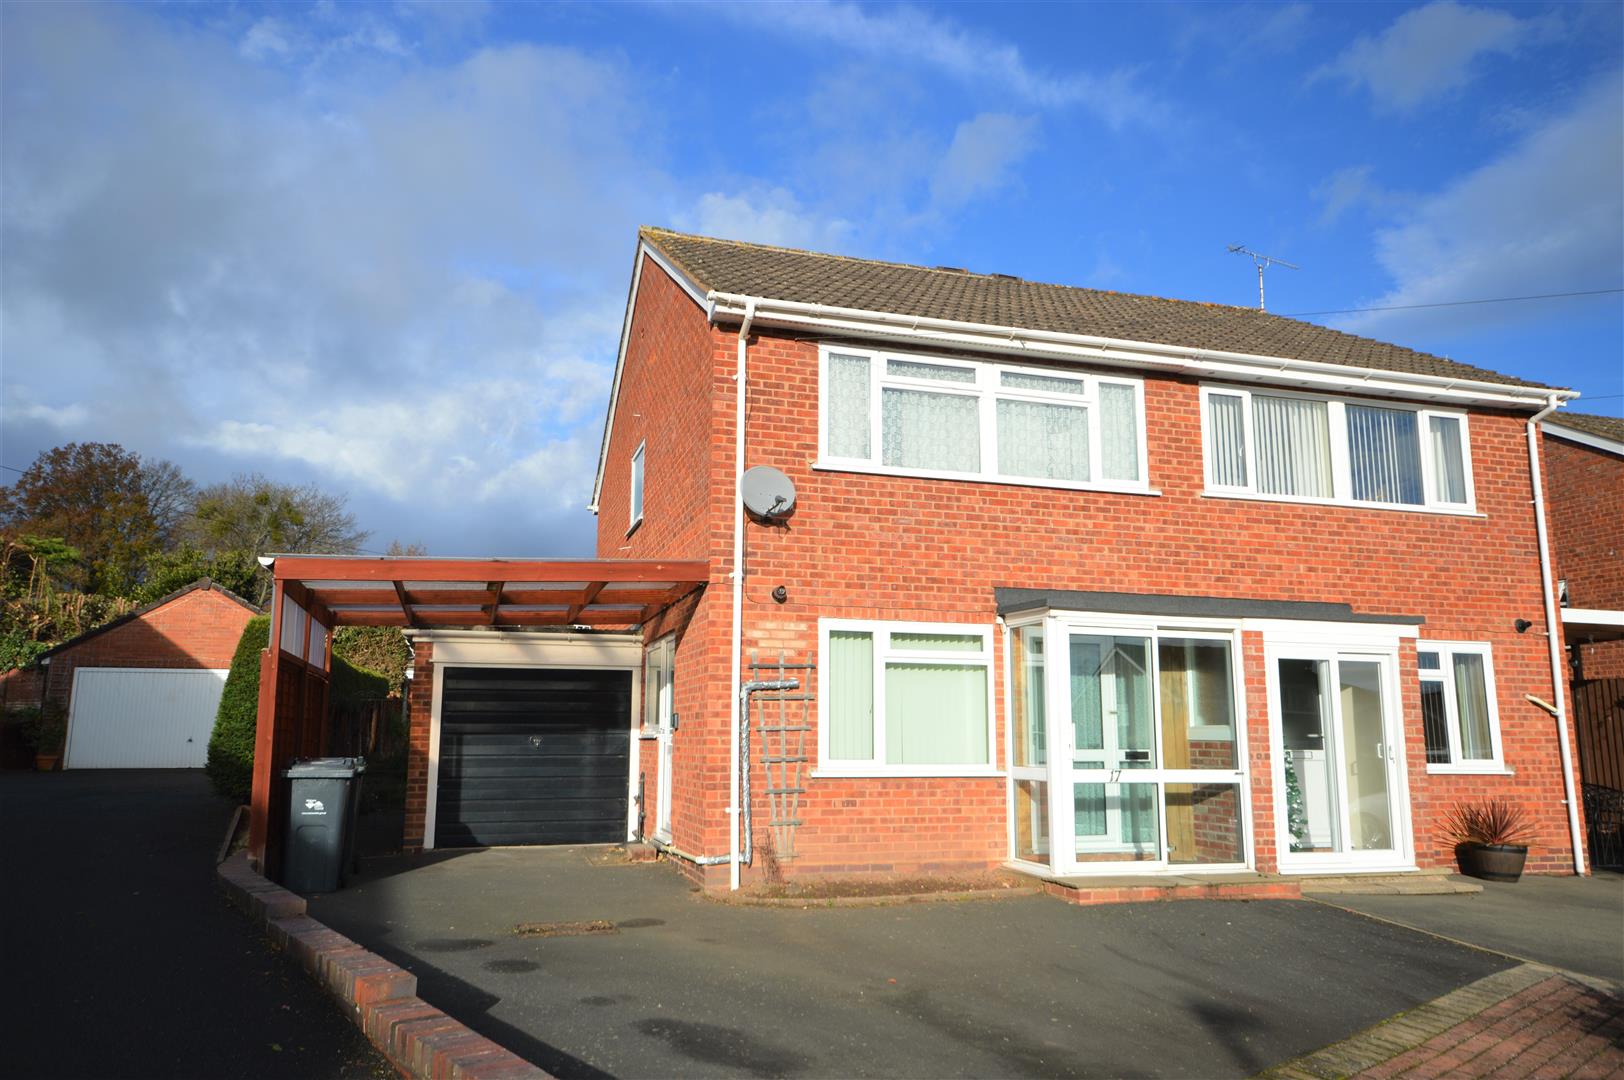 3 bed semi-detached for sale in Tenbury Wells, WR15